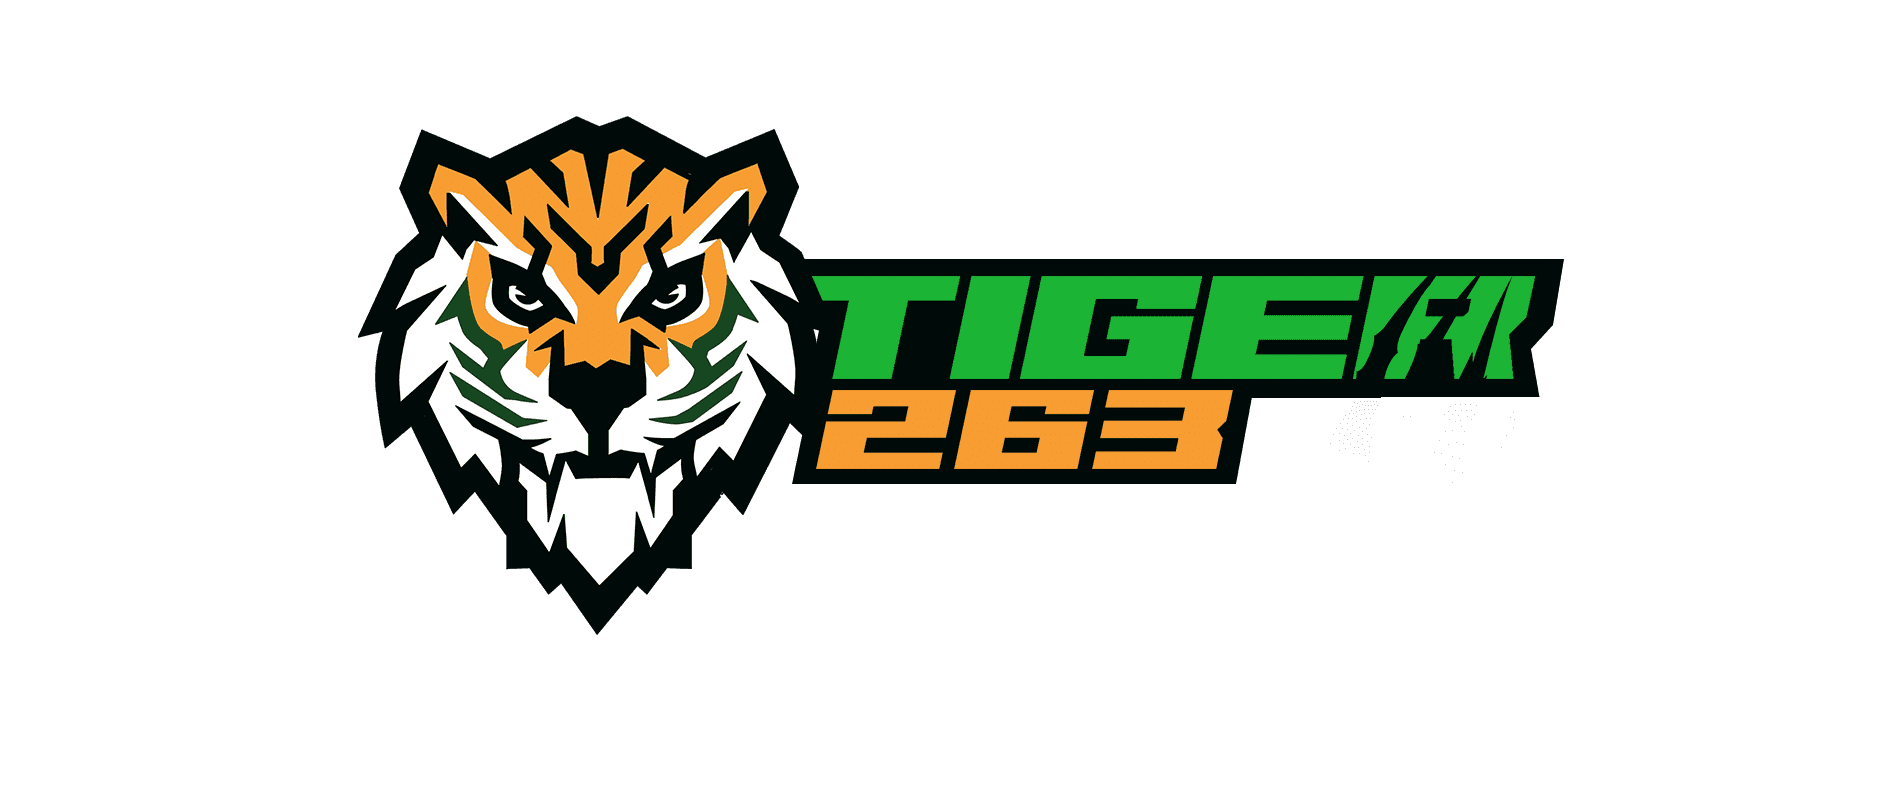 Tiger263 Online Casino Review